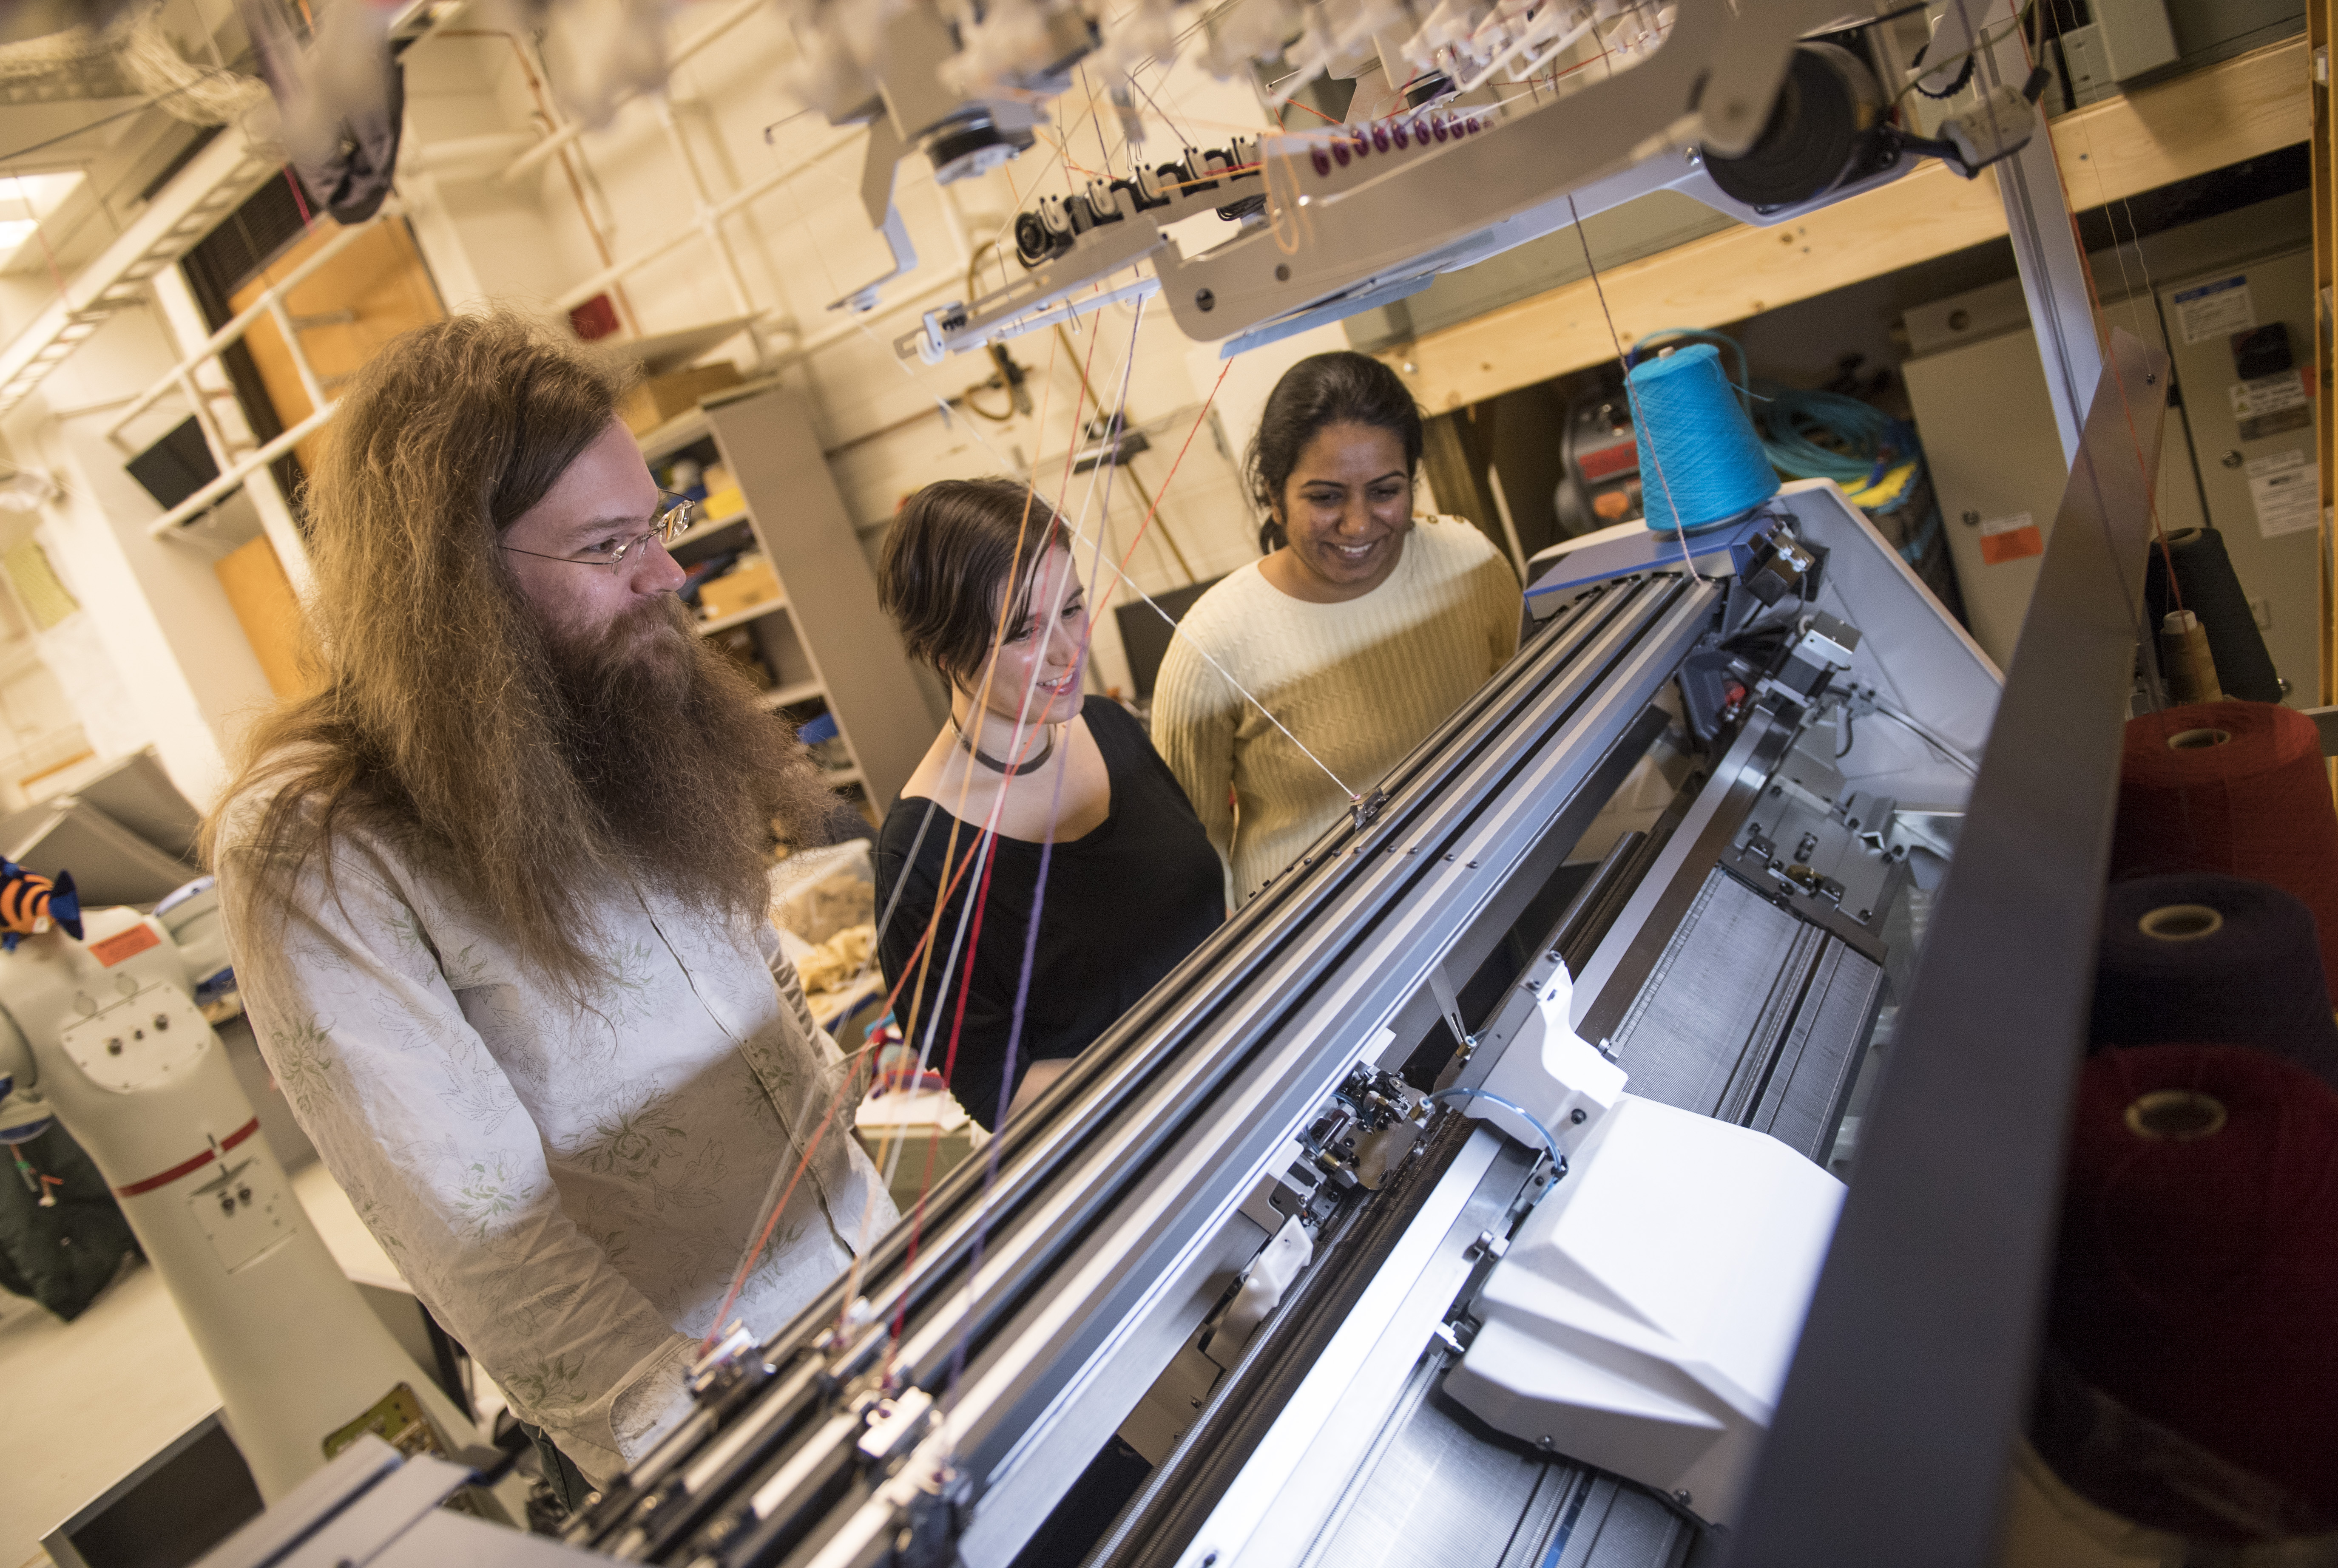 Photo shows James McCann, assistant professor of robotics; Lea Albaugh, Ph.D. student in Human-Computer Interaction Institute, and Vidya Narayanan, Ph.D. in the Computer Science Department, with their knitting machine